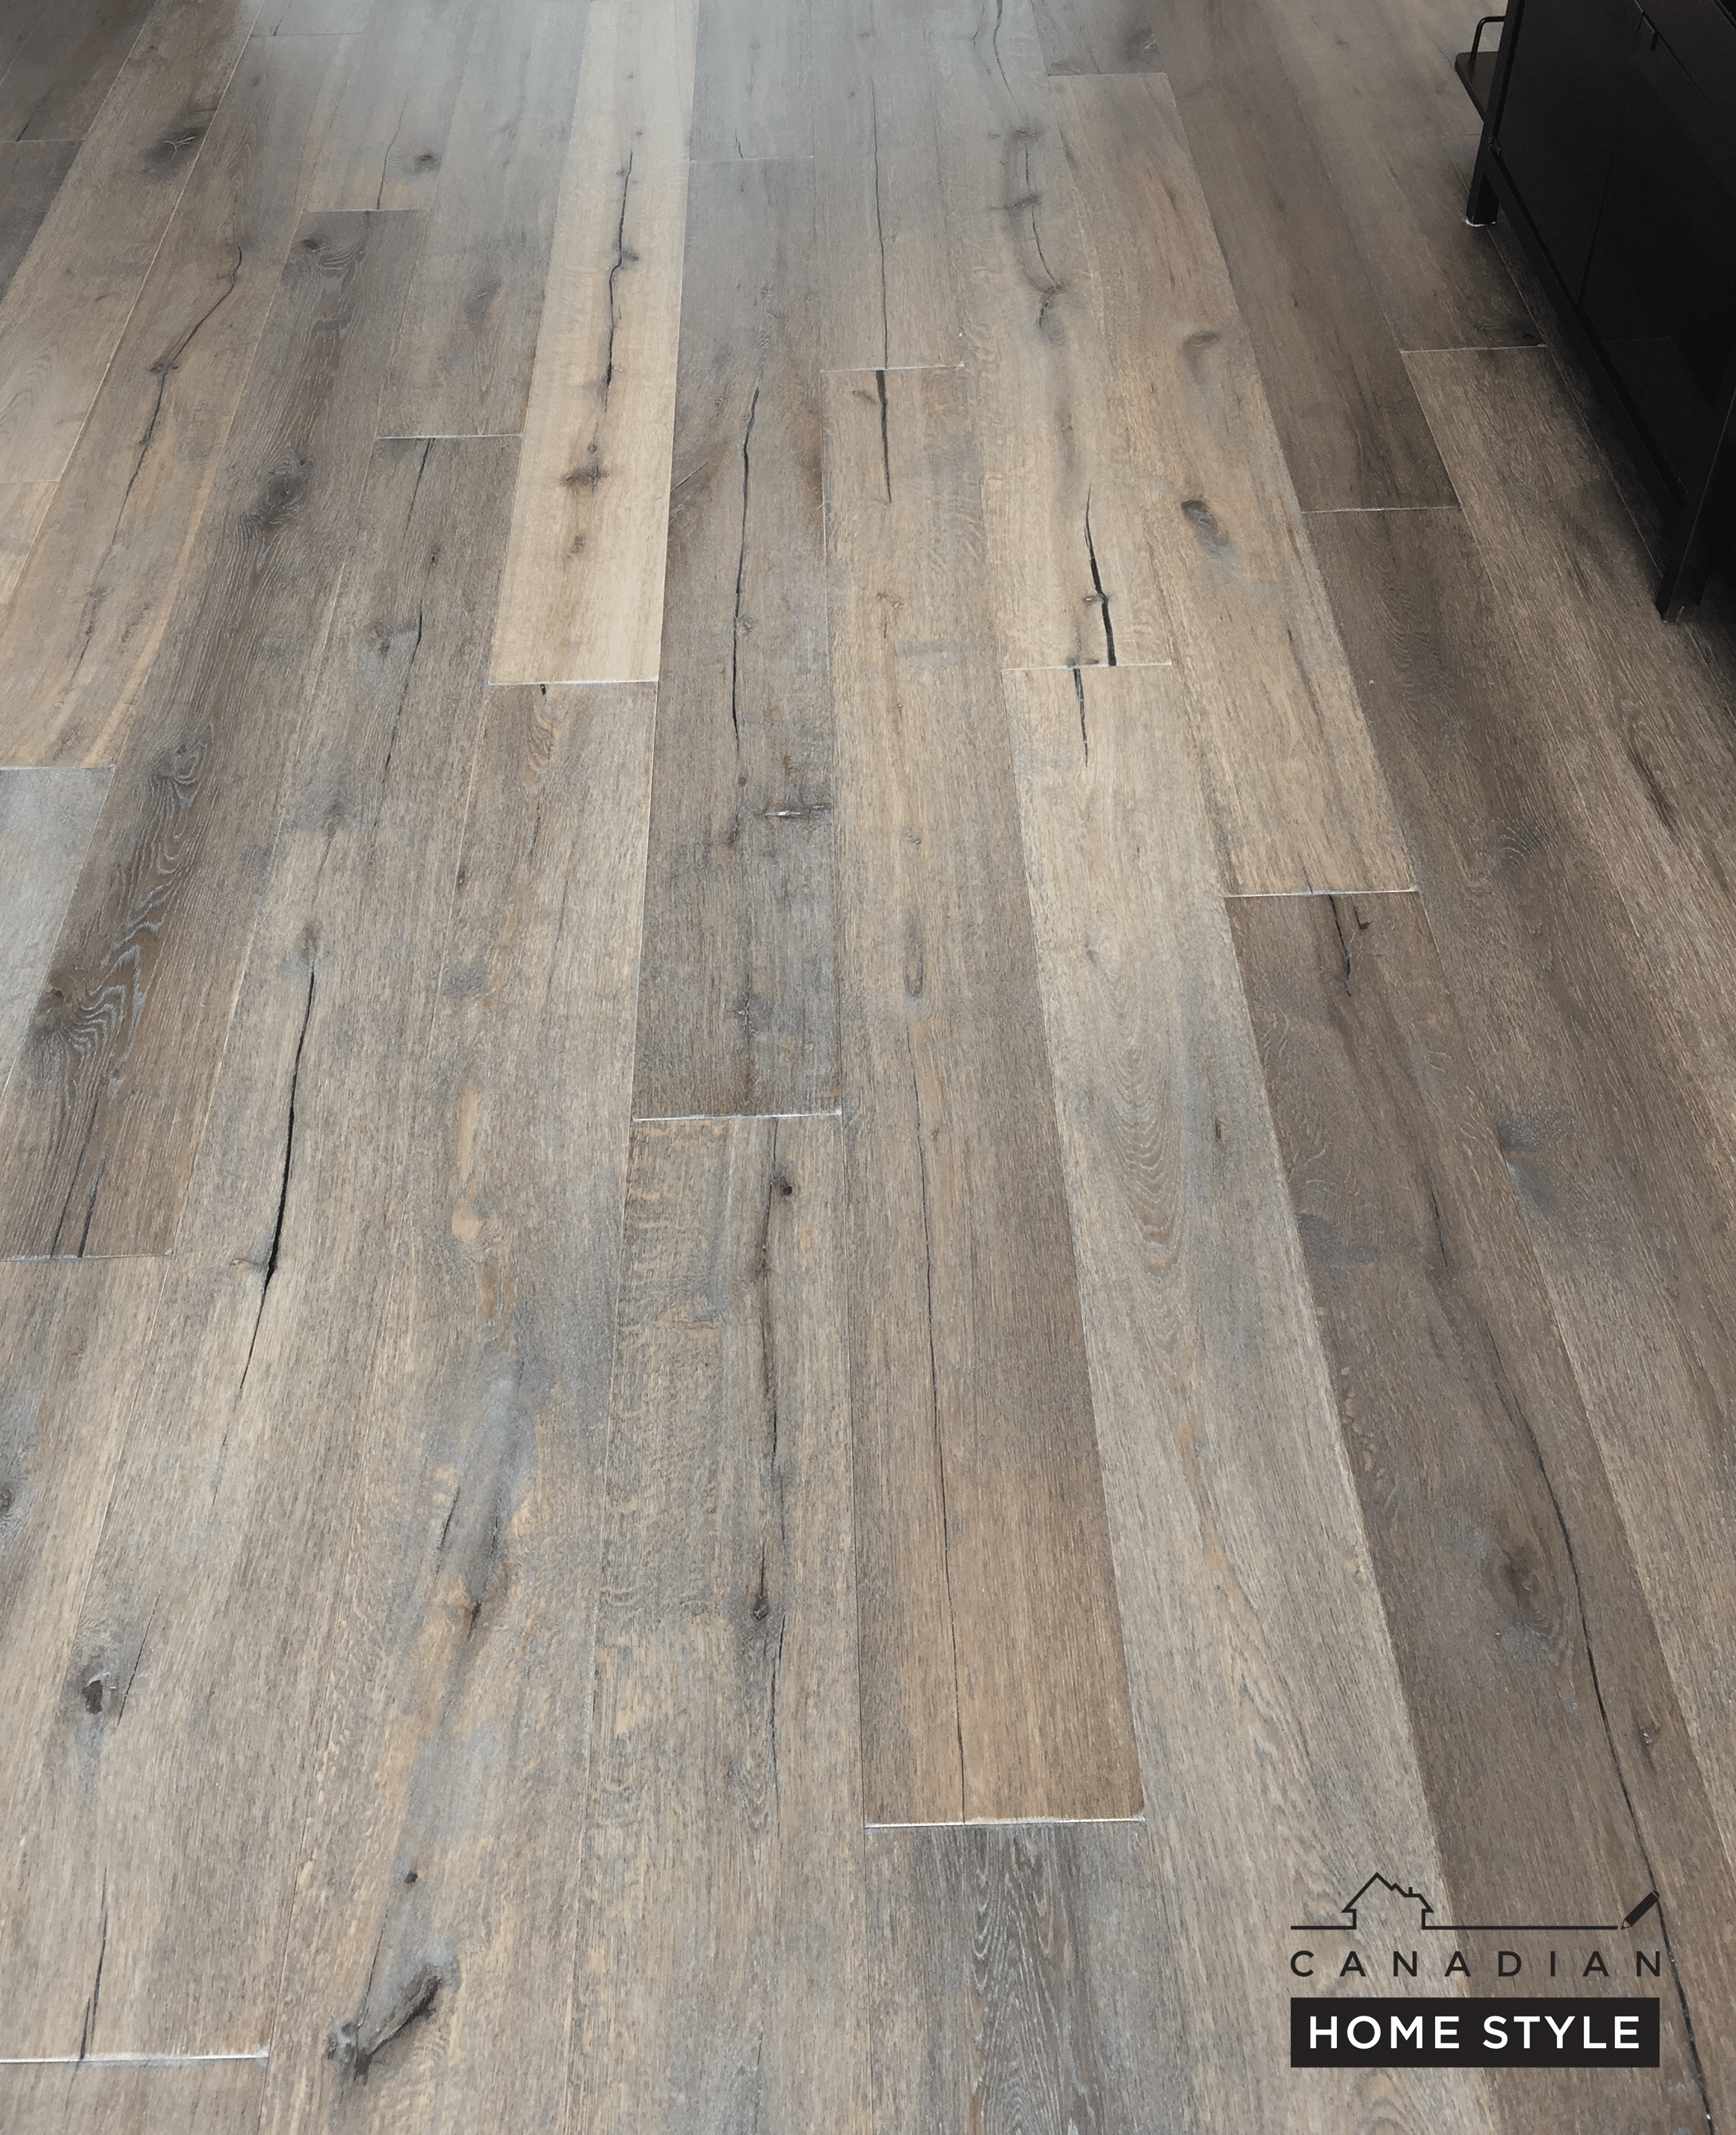 Sturdy and reliable hardwood flooring in Vancouver